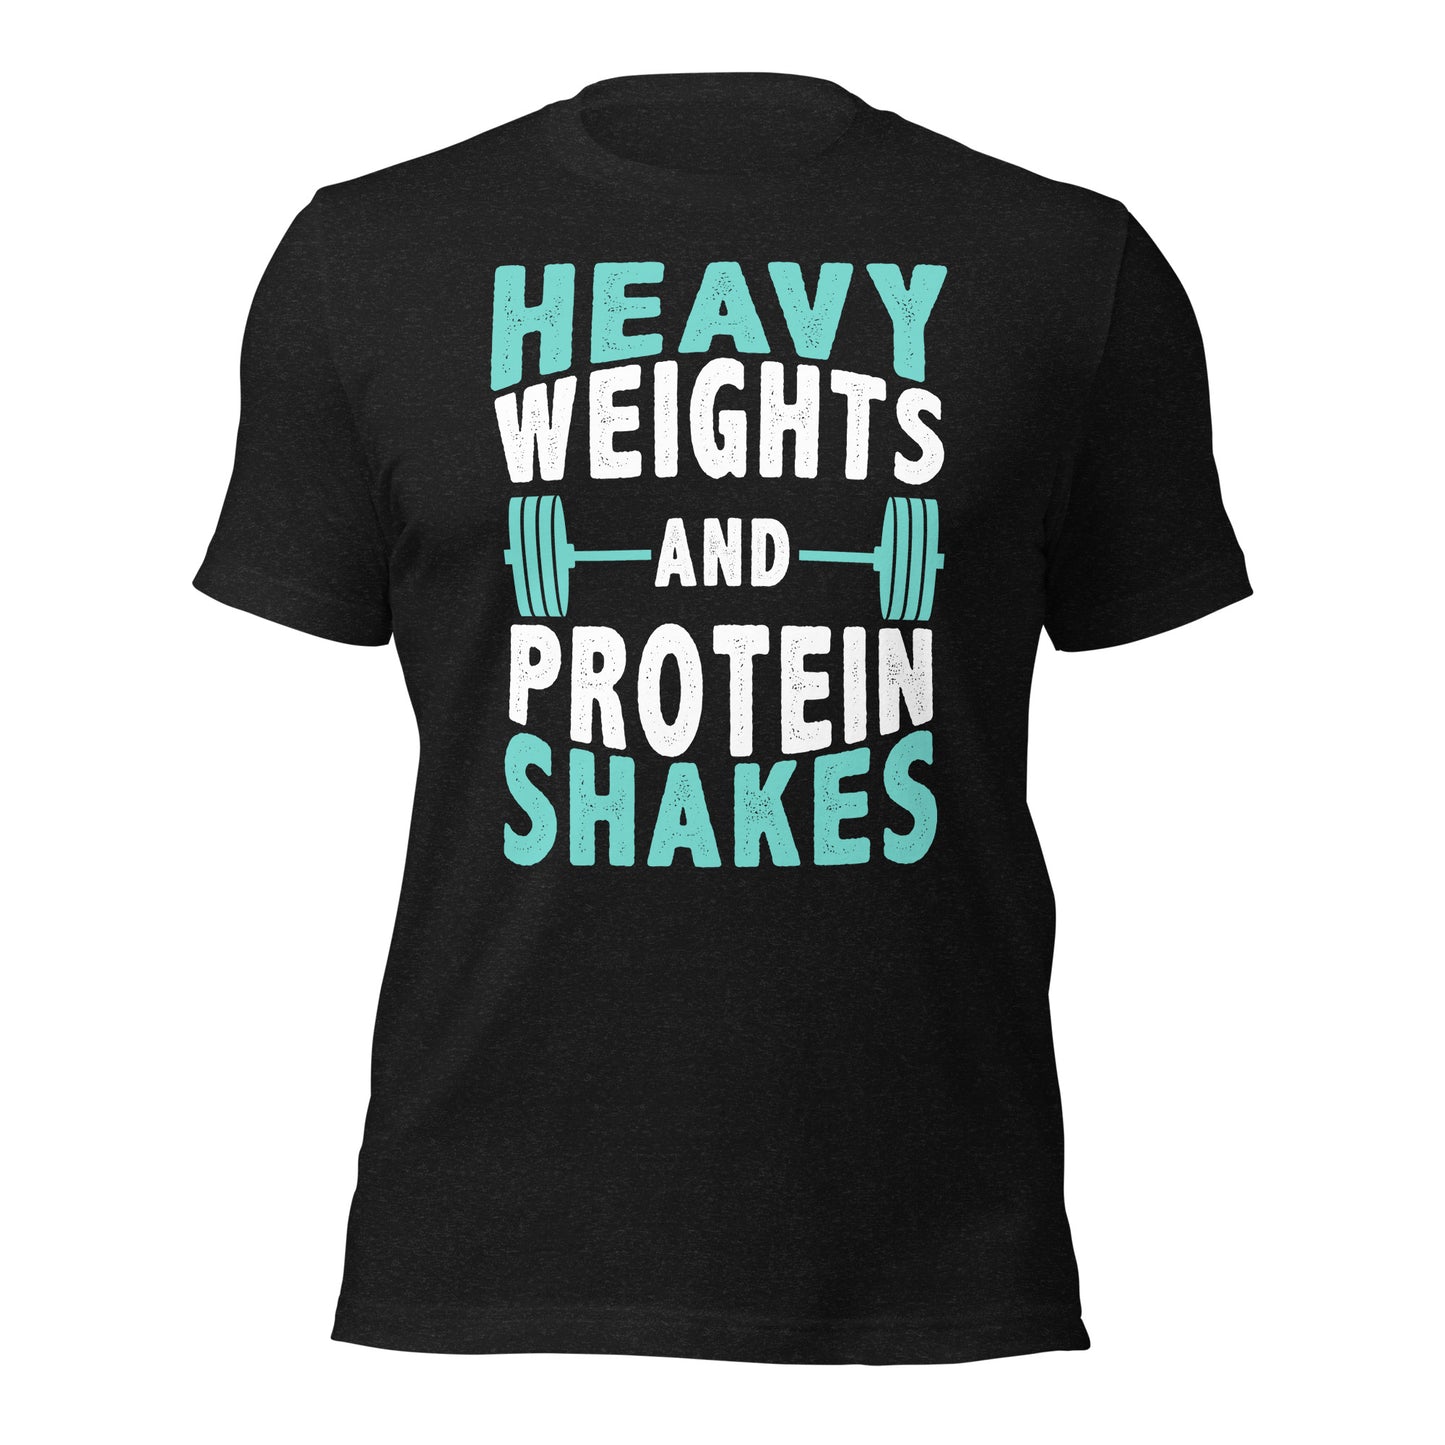 Heavy weights protein shakes tee black